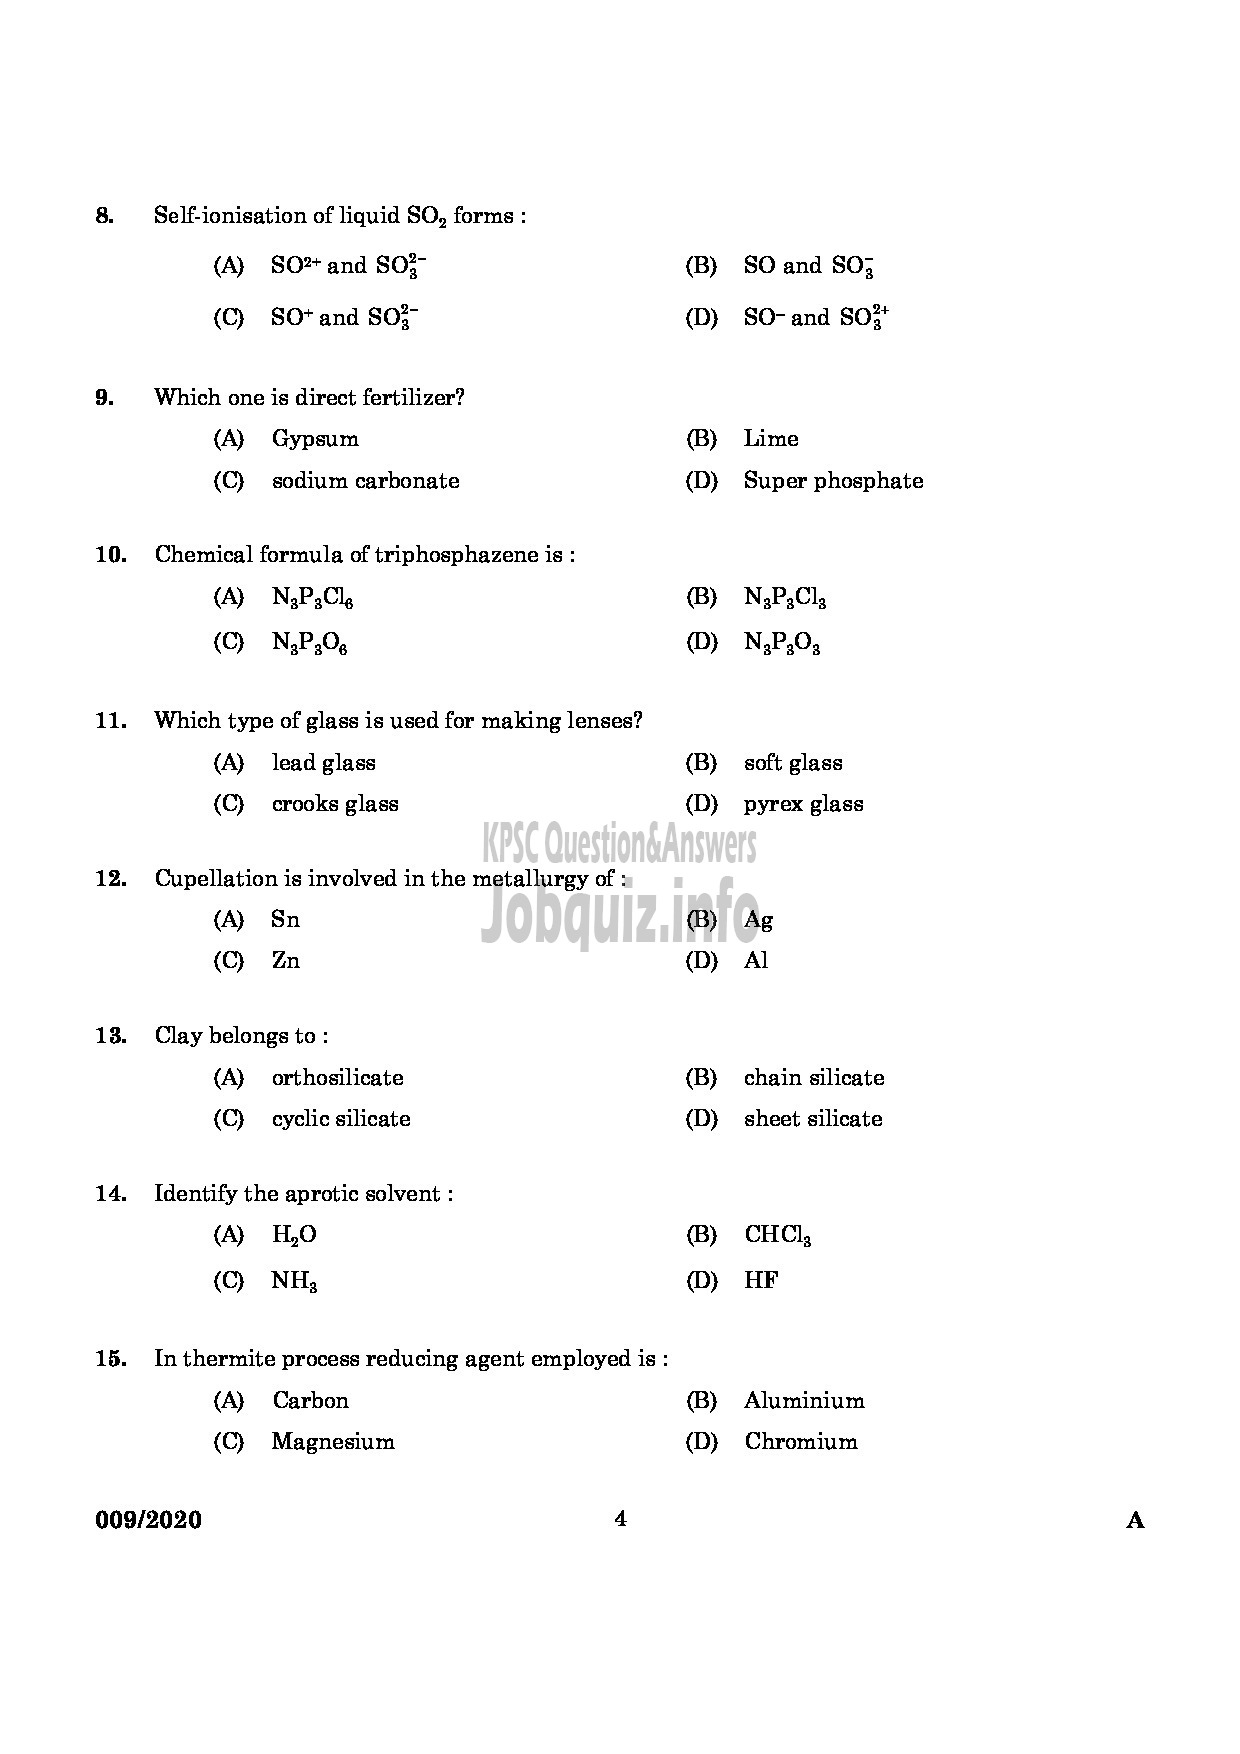 Kerala PSC Question Paper - CHEMIST IN FACTORIES AND BOILERS ENGLISH -2